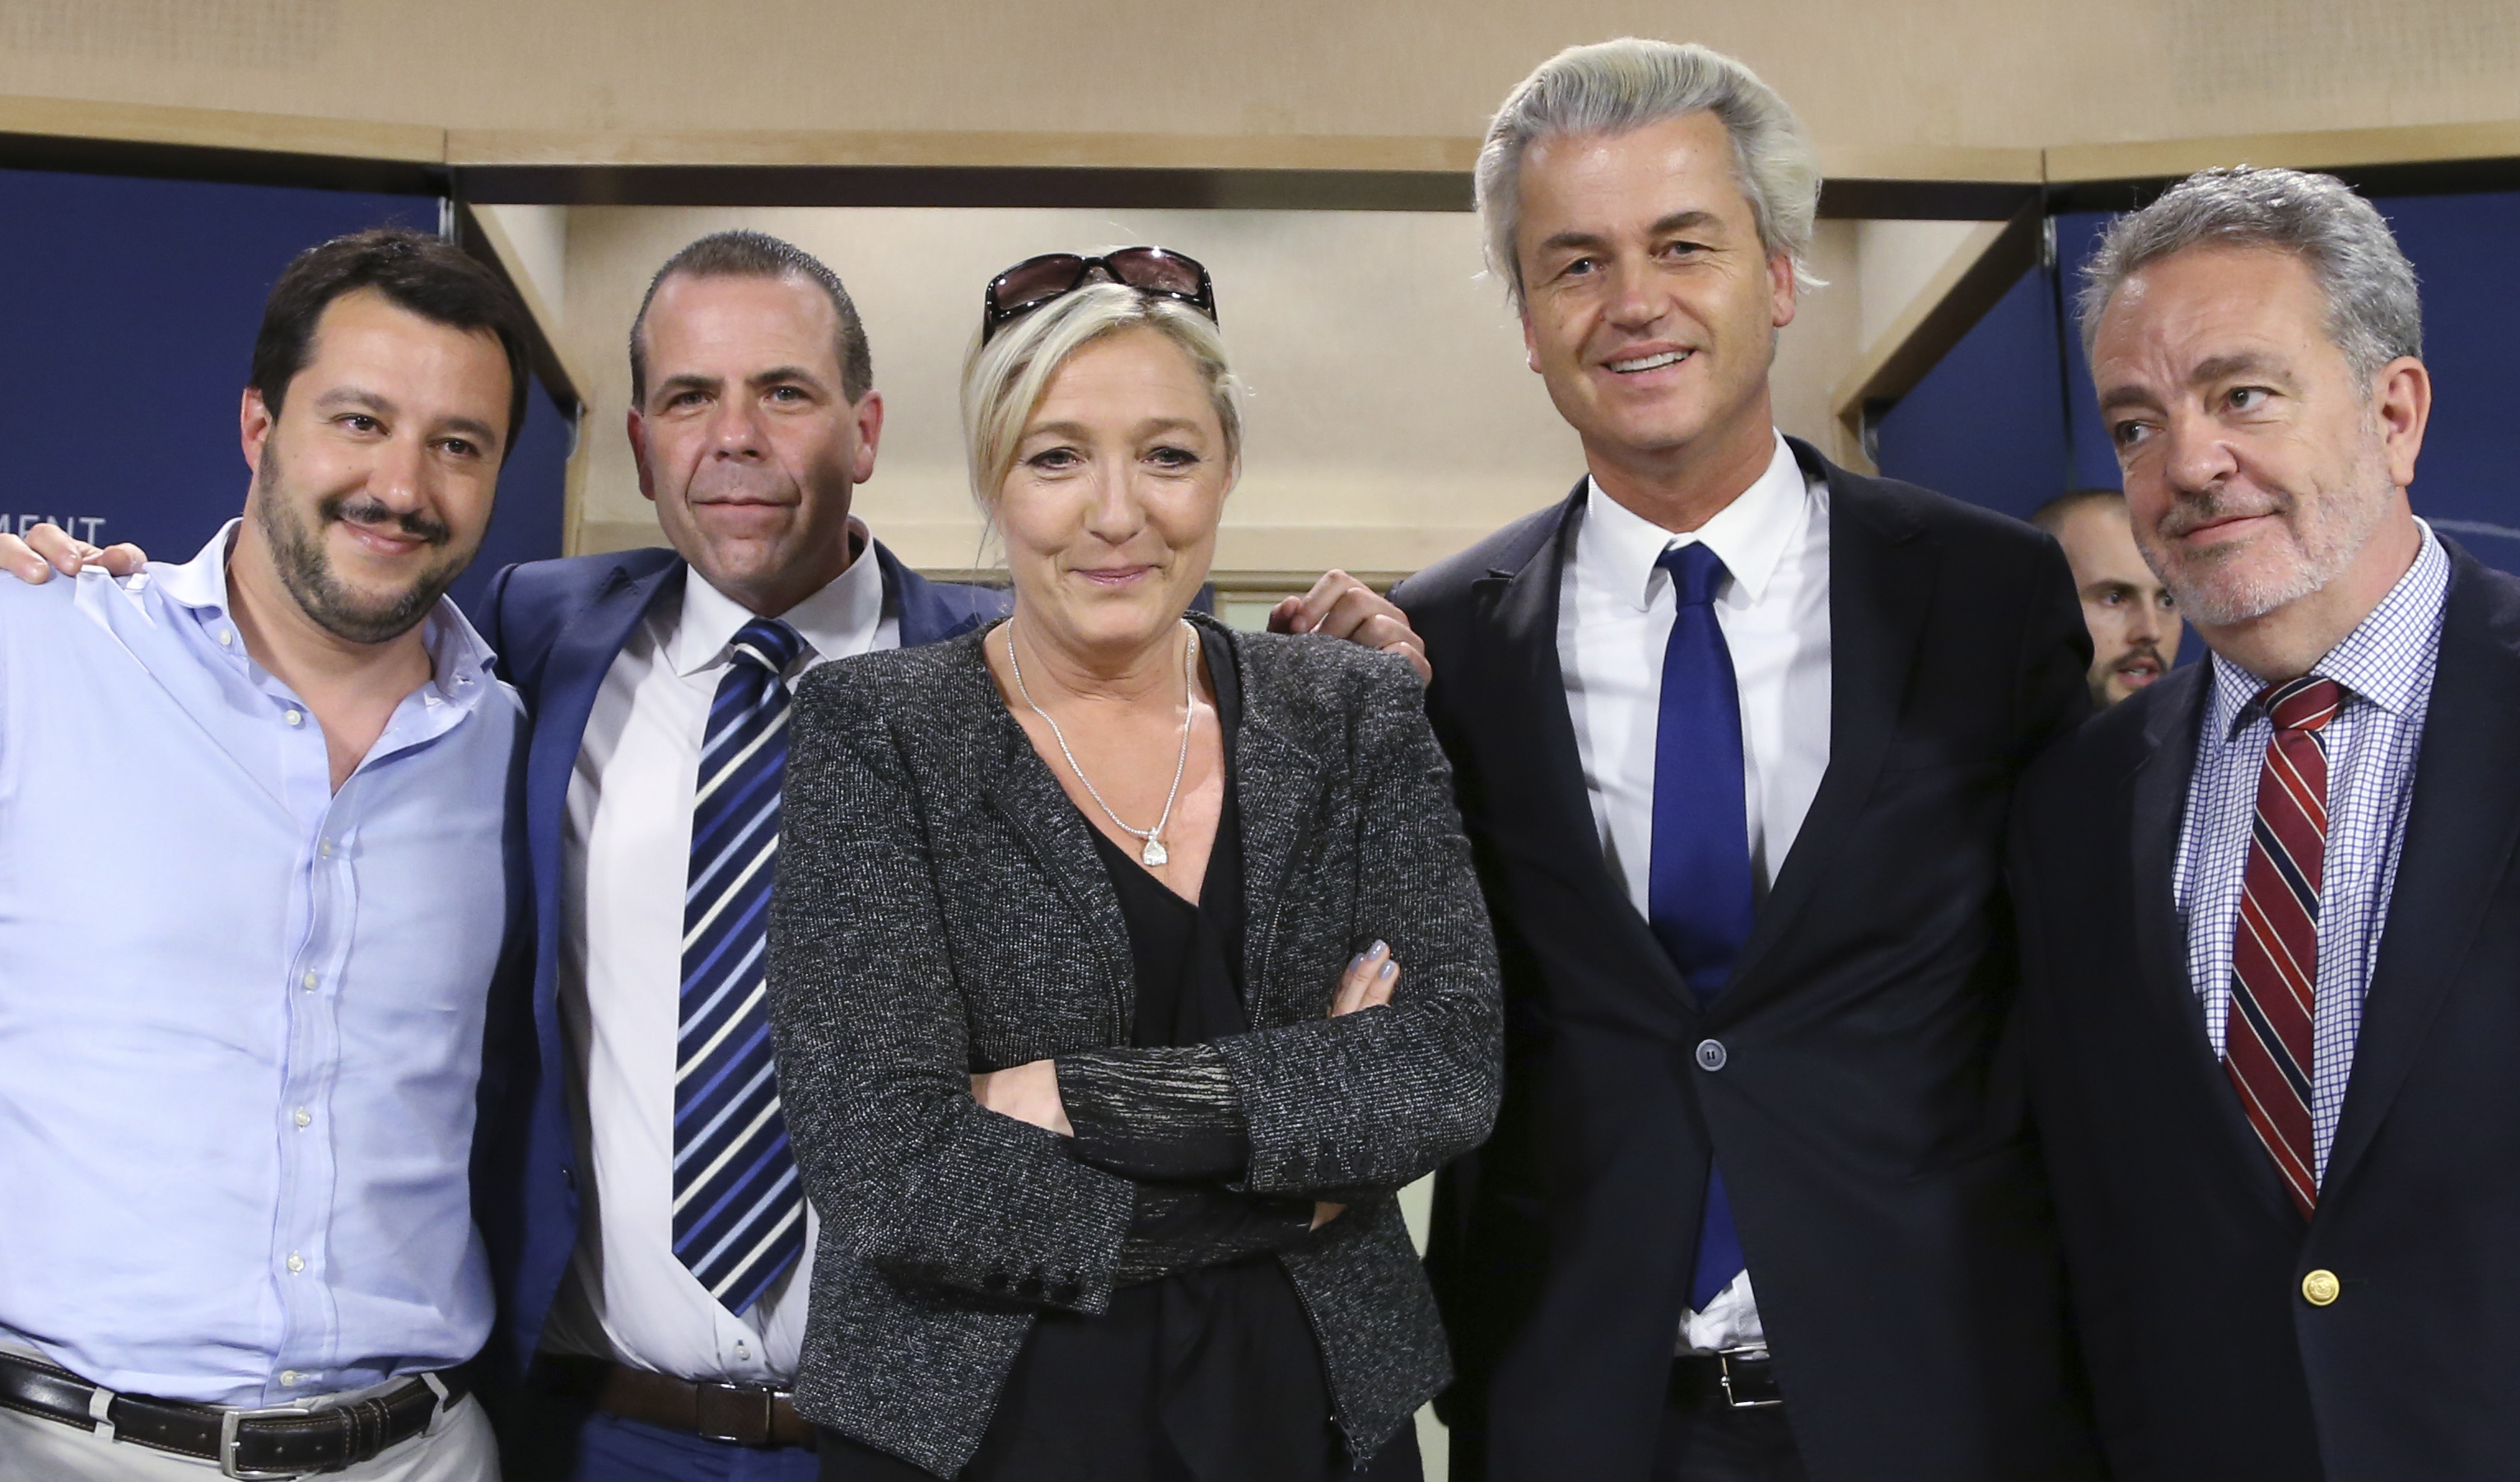 (L-R) Matteo Salvini, Italy's Lega Nord party member, Austria's far-right Freedom Party (FPOe) member Harald Vilimsky, Marine Le Pen, France's National Front political party head, Dutch far-right Freedom Party (PVV) leader Geert Wilders and Belgium's Flemish right wing Vlaams Belang party member Gerolf Annemans pose during a joint news conference at the European Parliament in Brussels May 28, 2014. REUTERS/Francois Lenoir (BELGIUM - Tags: POLITICS ELECTIONS) - RTR3R8ZF